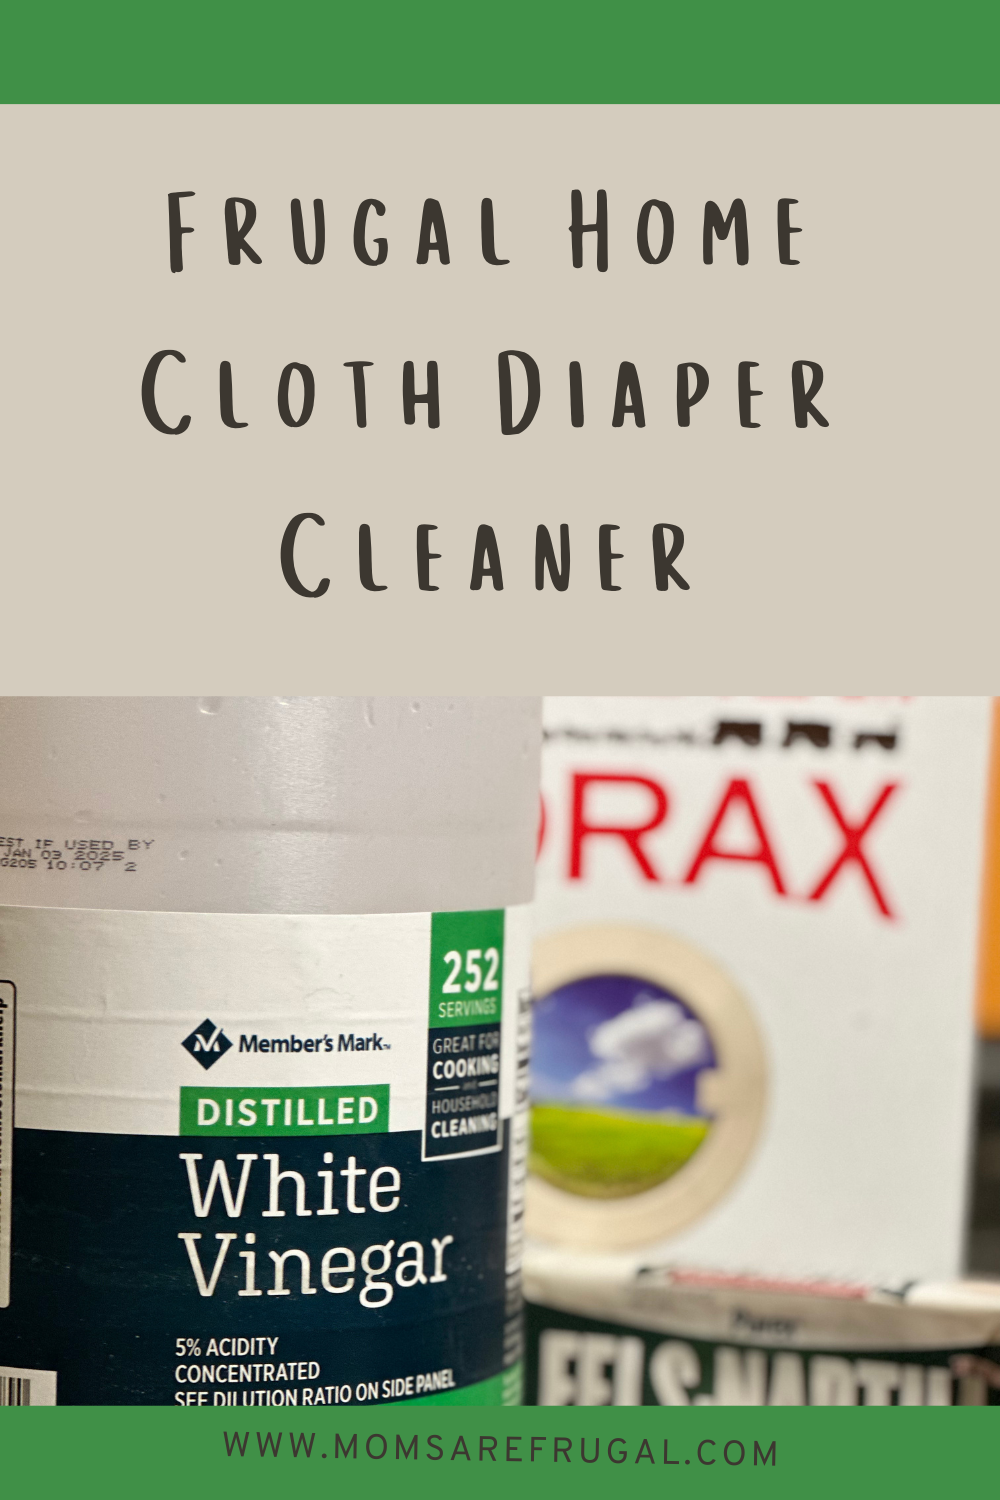 Frugal Home Cloth Diaper Cleaner